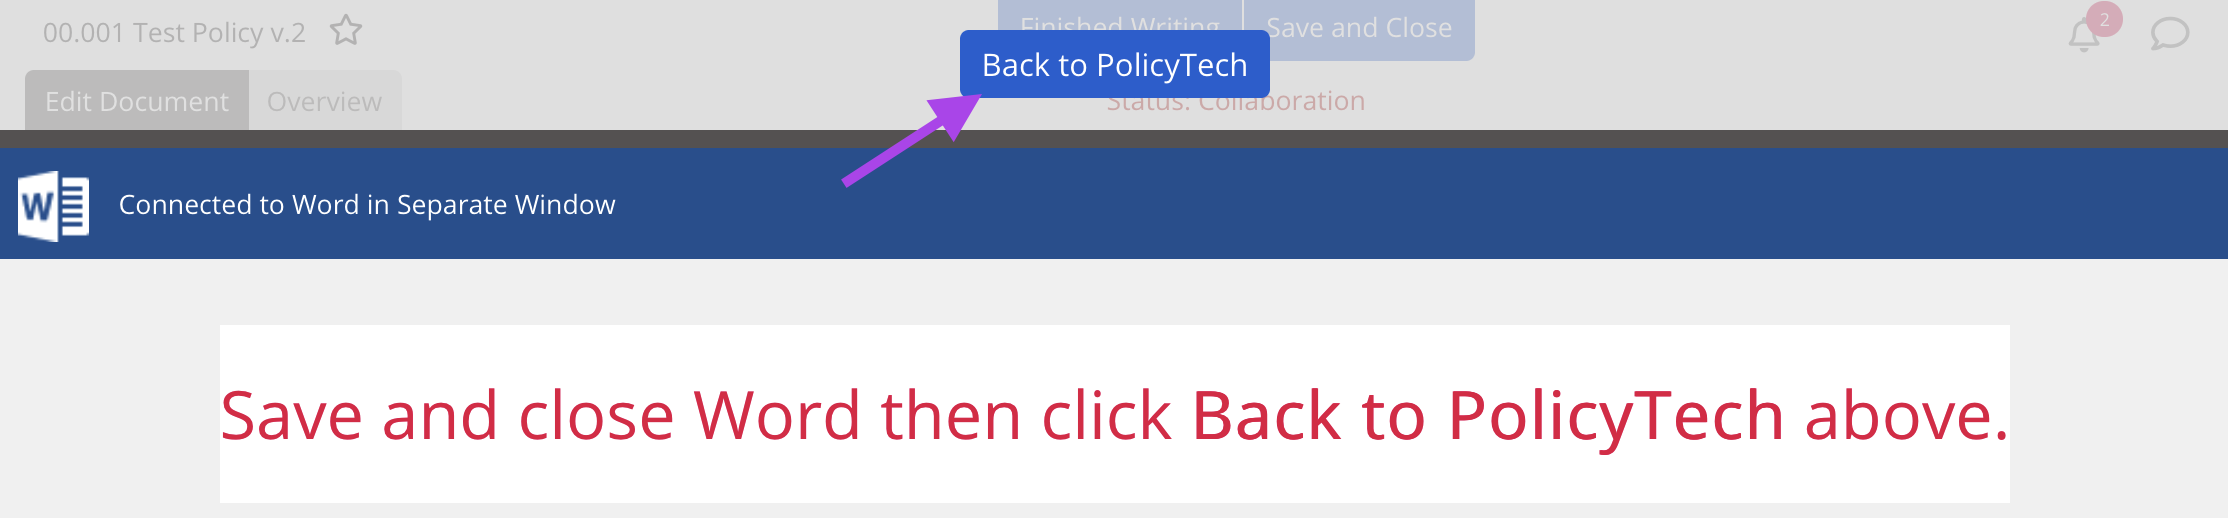 Screen capture of PolicyTech